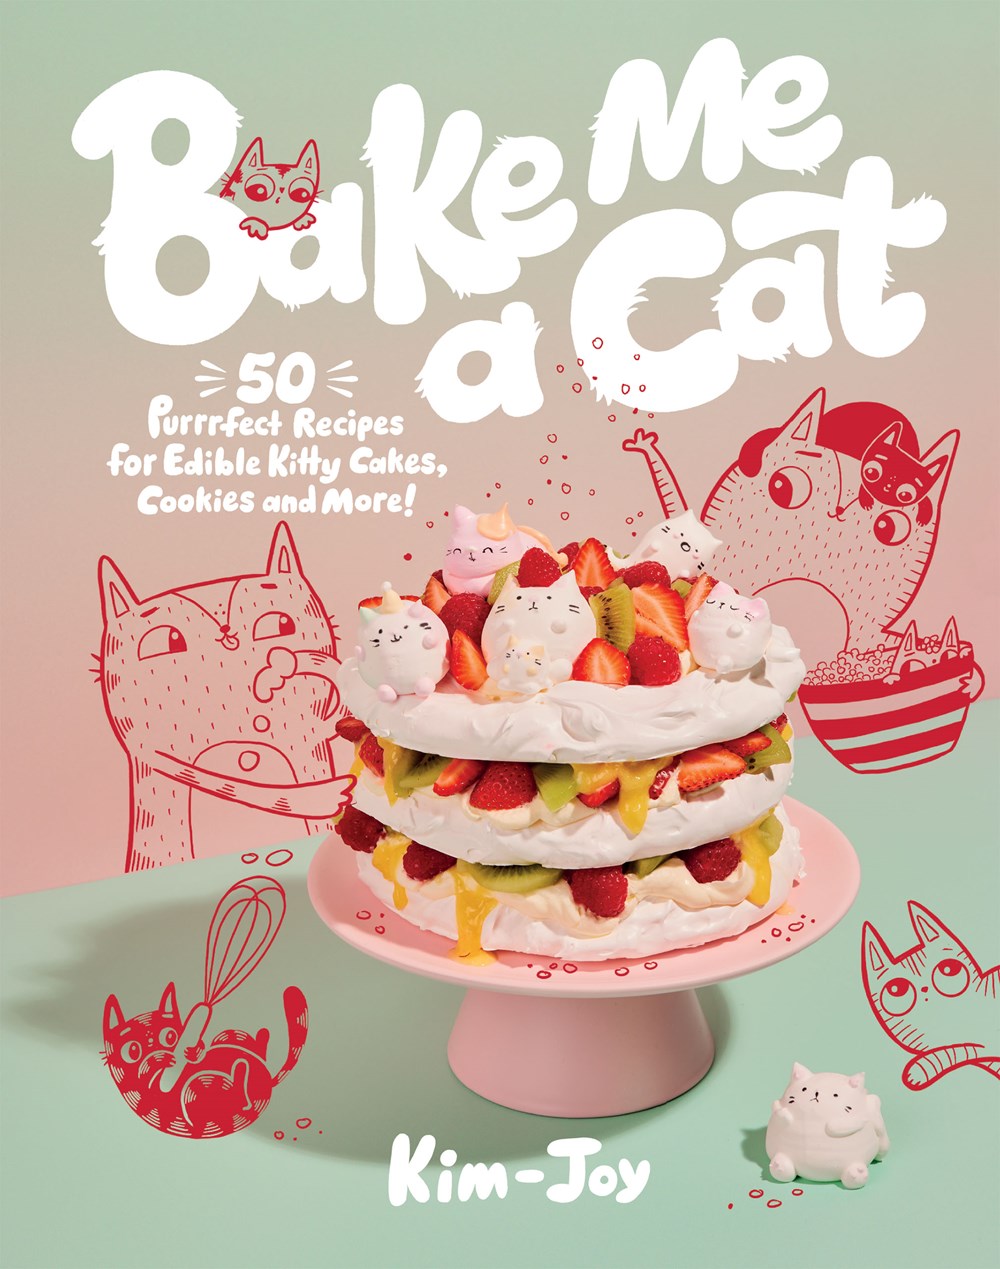 Bake Me a Cat: 50 Purrrfect Recipes for Edible Kitty Cakes, Cookies, and More!